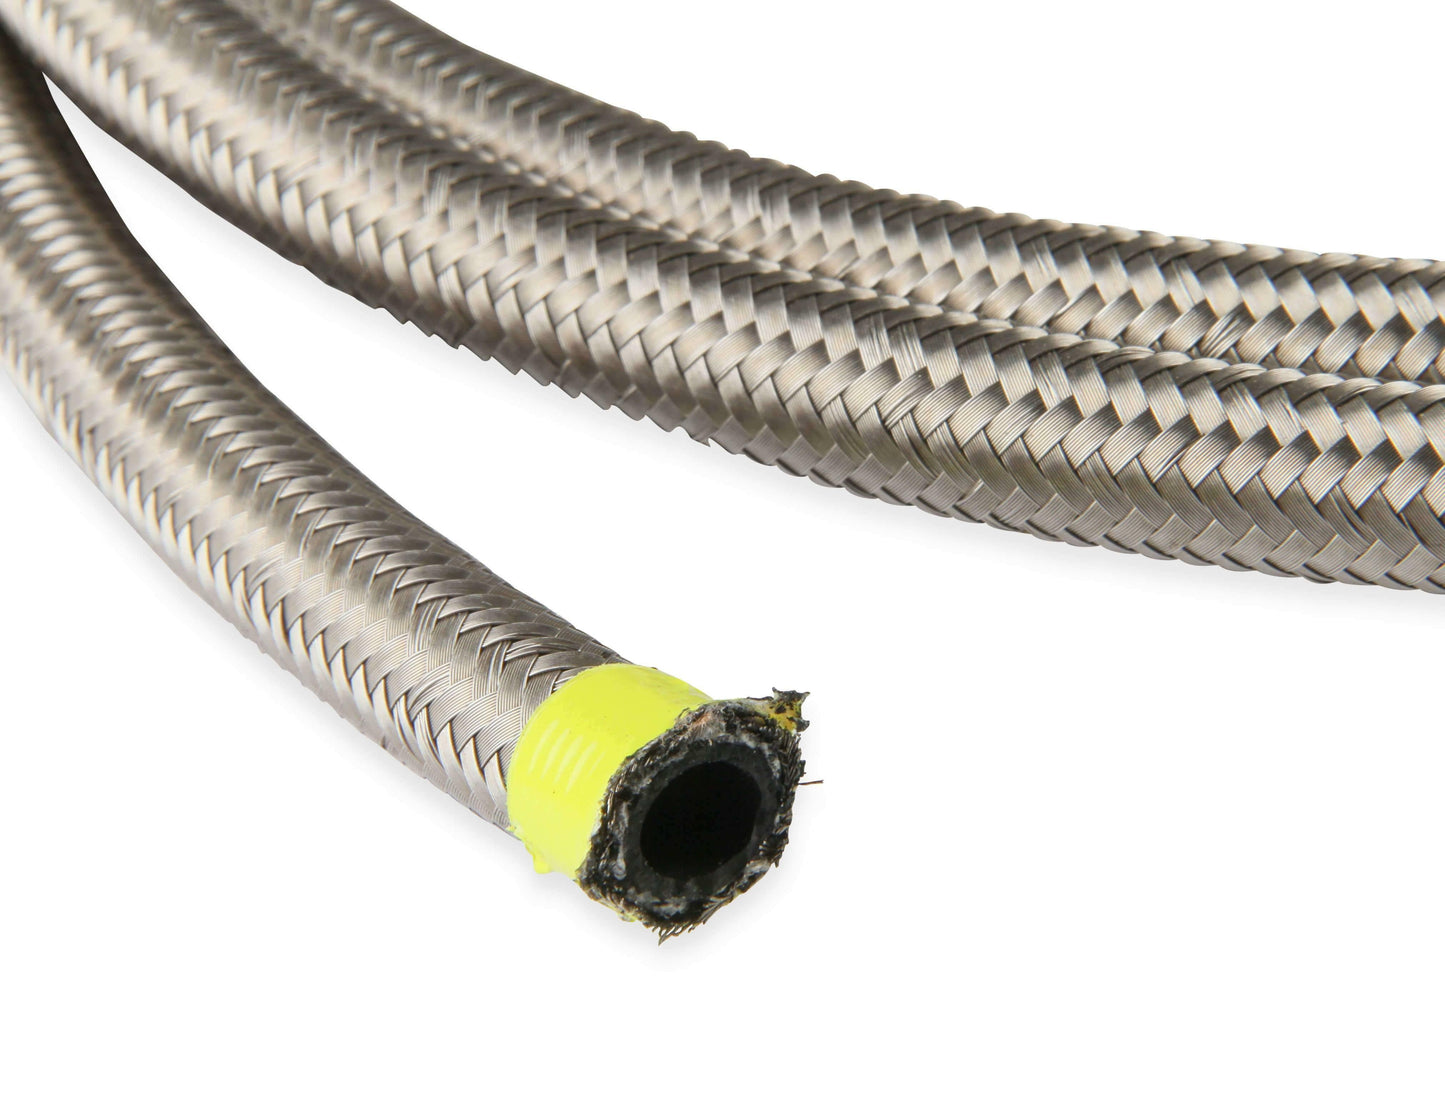 Earls Auto-Flex Hose- Size6 -Sold per Foot Continuous Length upto 50'- 300006ERL